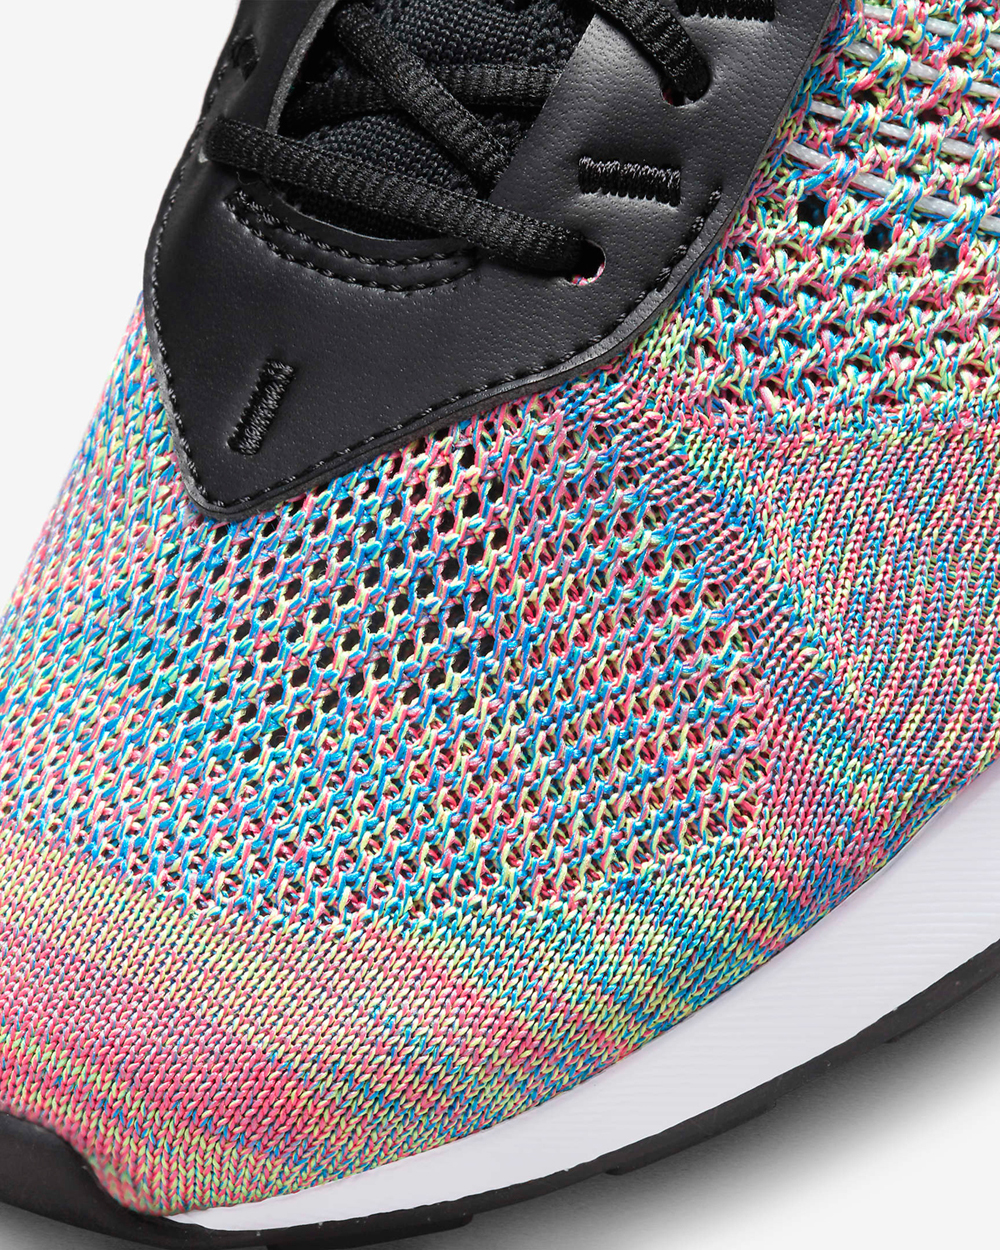 nike-air-max-flyknit-racer-multi-color-release-date-7